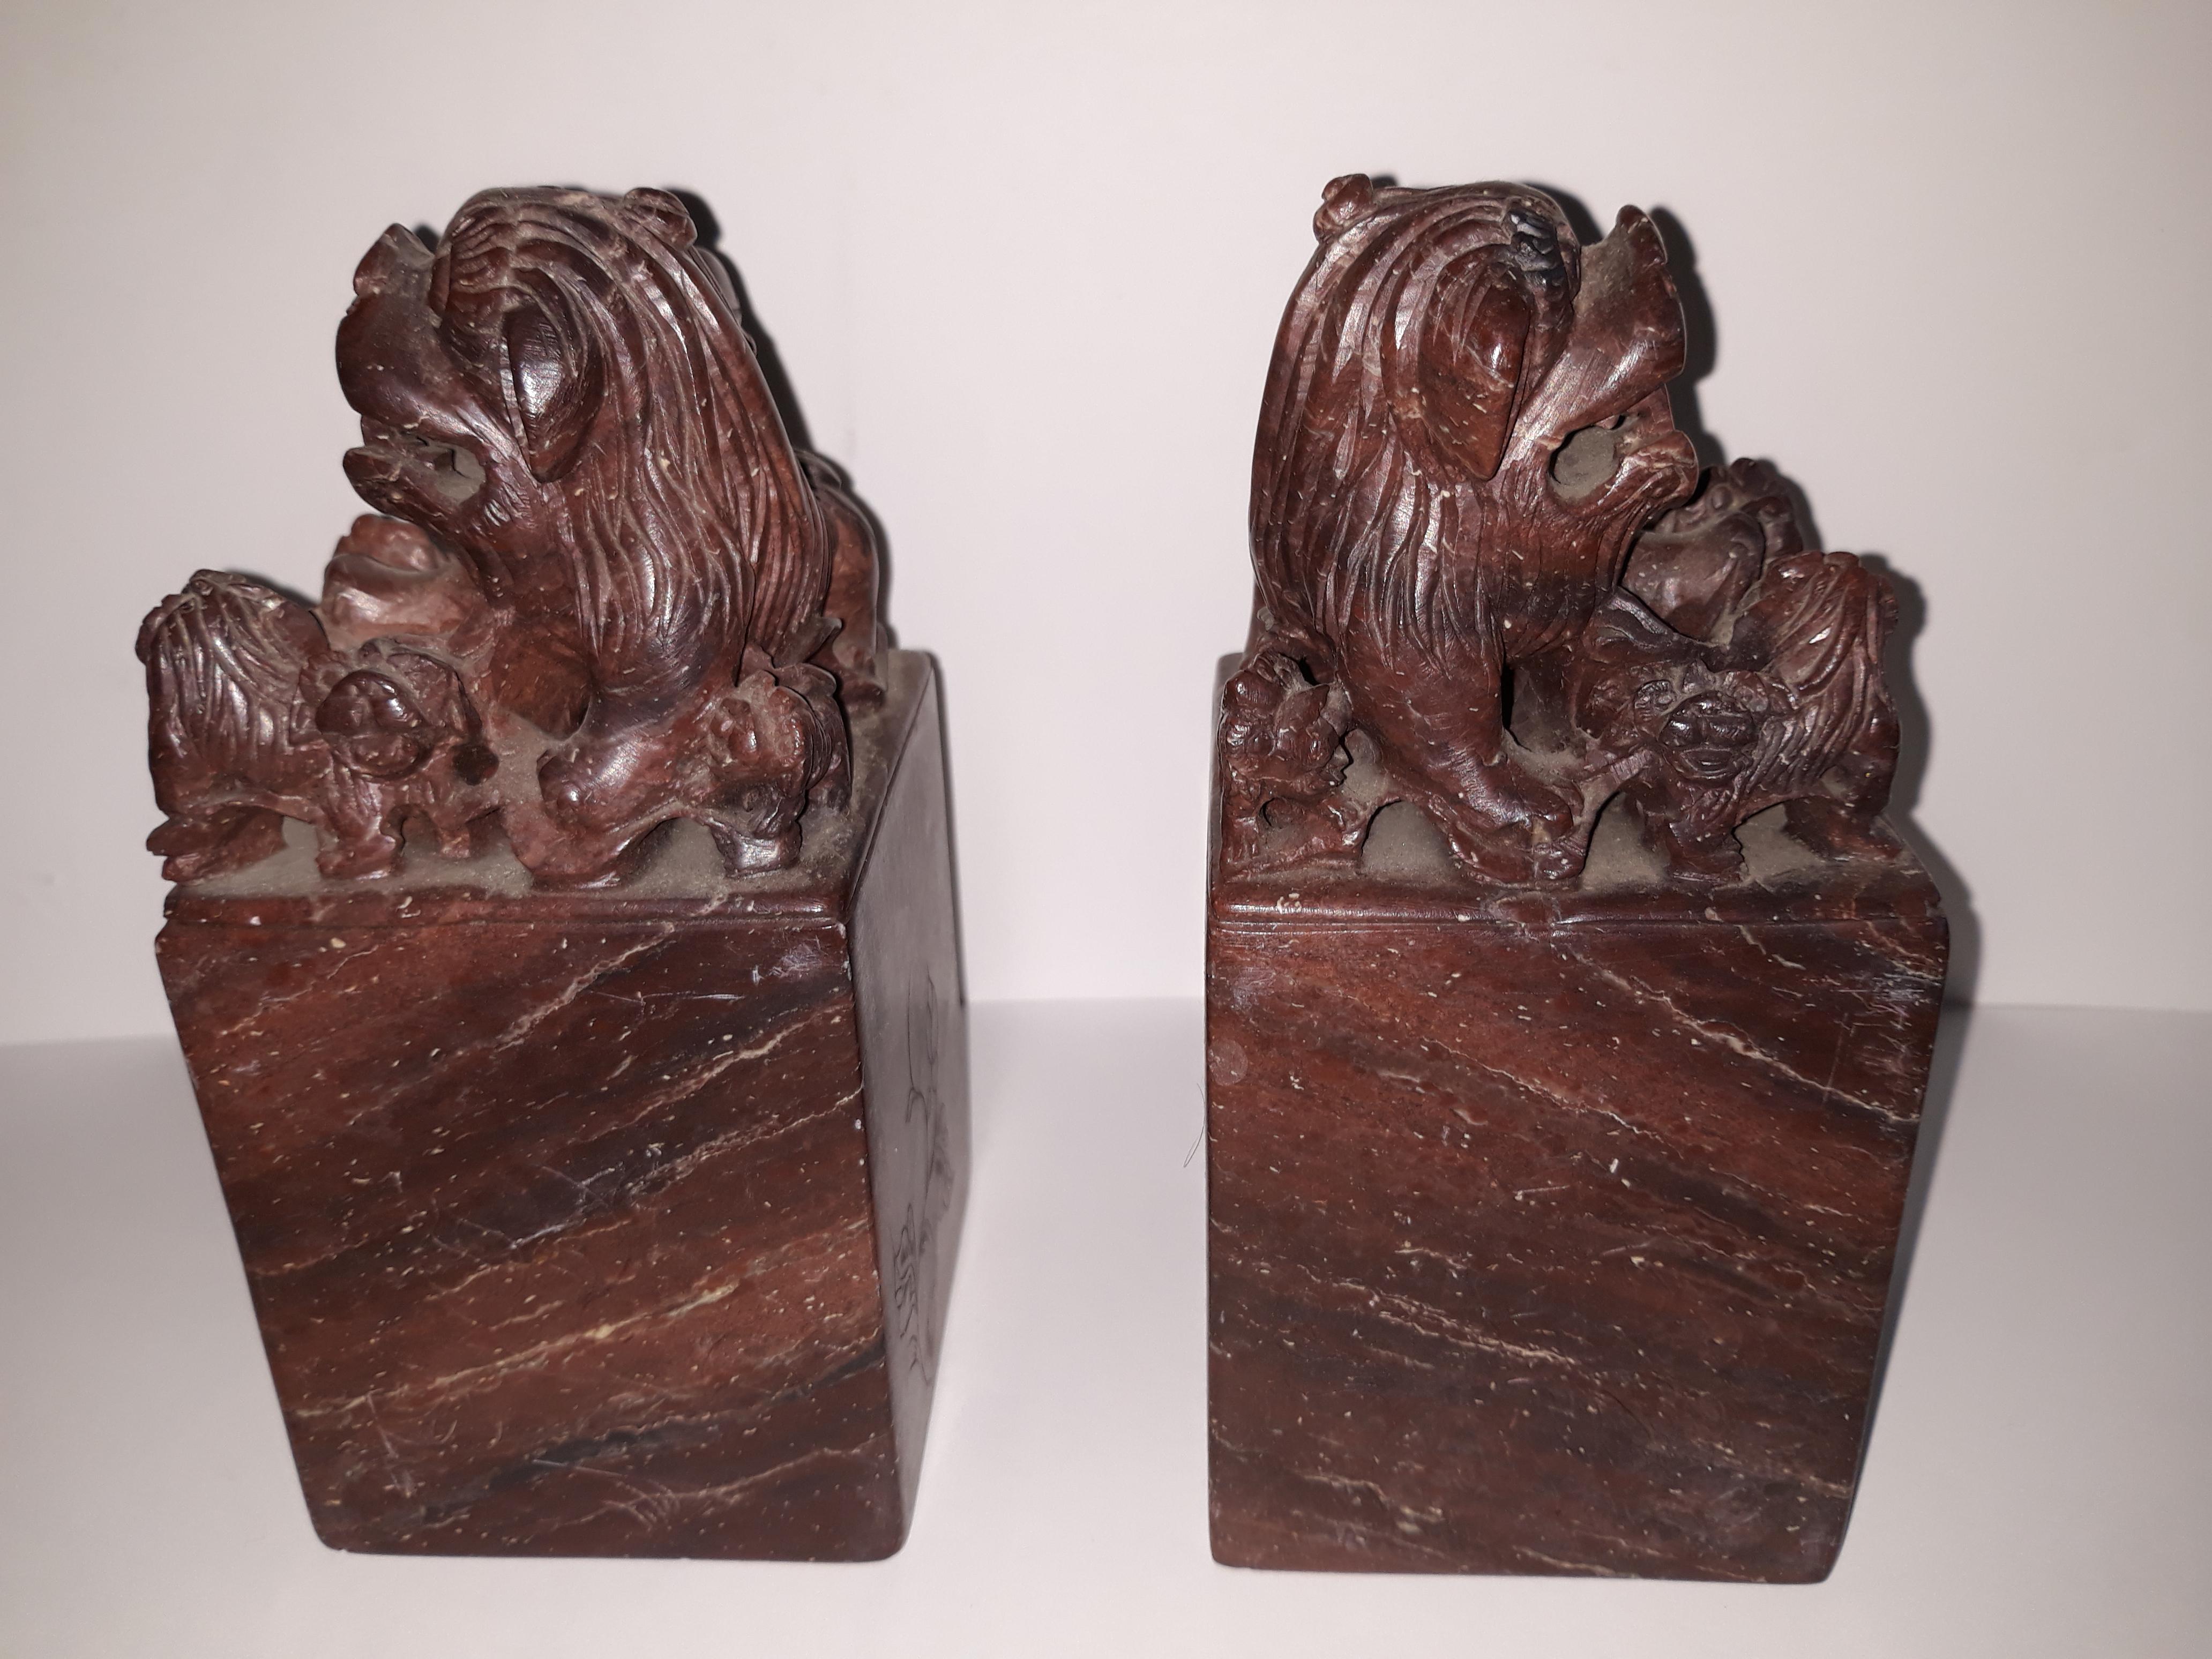 Chinoiserie Pair of Marble Ancient Chinese Bookends Cing Period Emperor Puyi For Sale